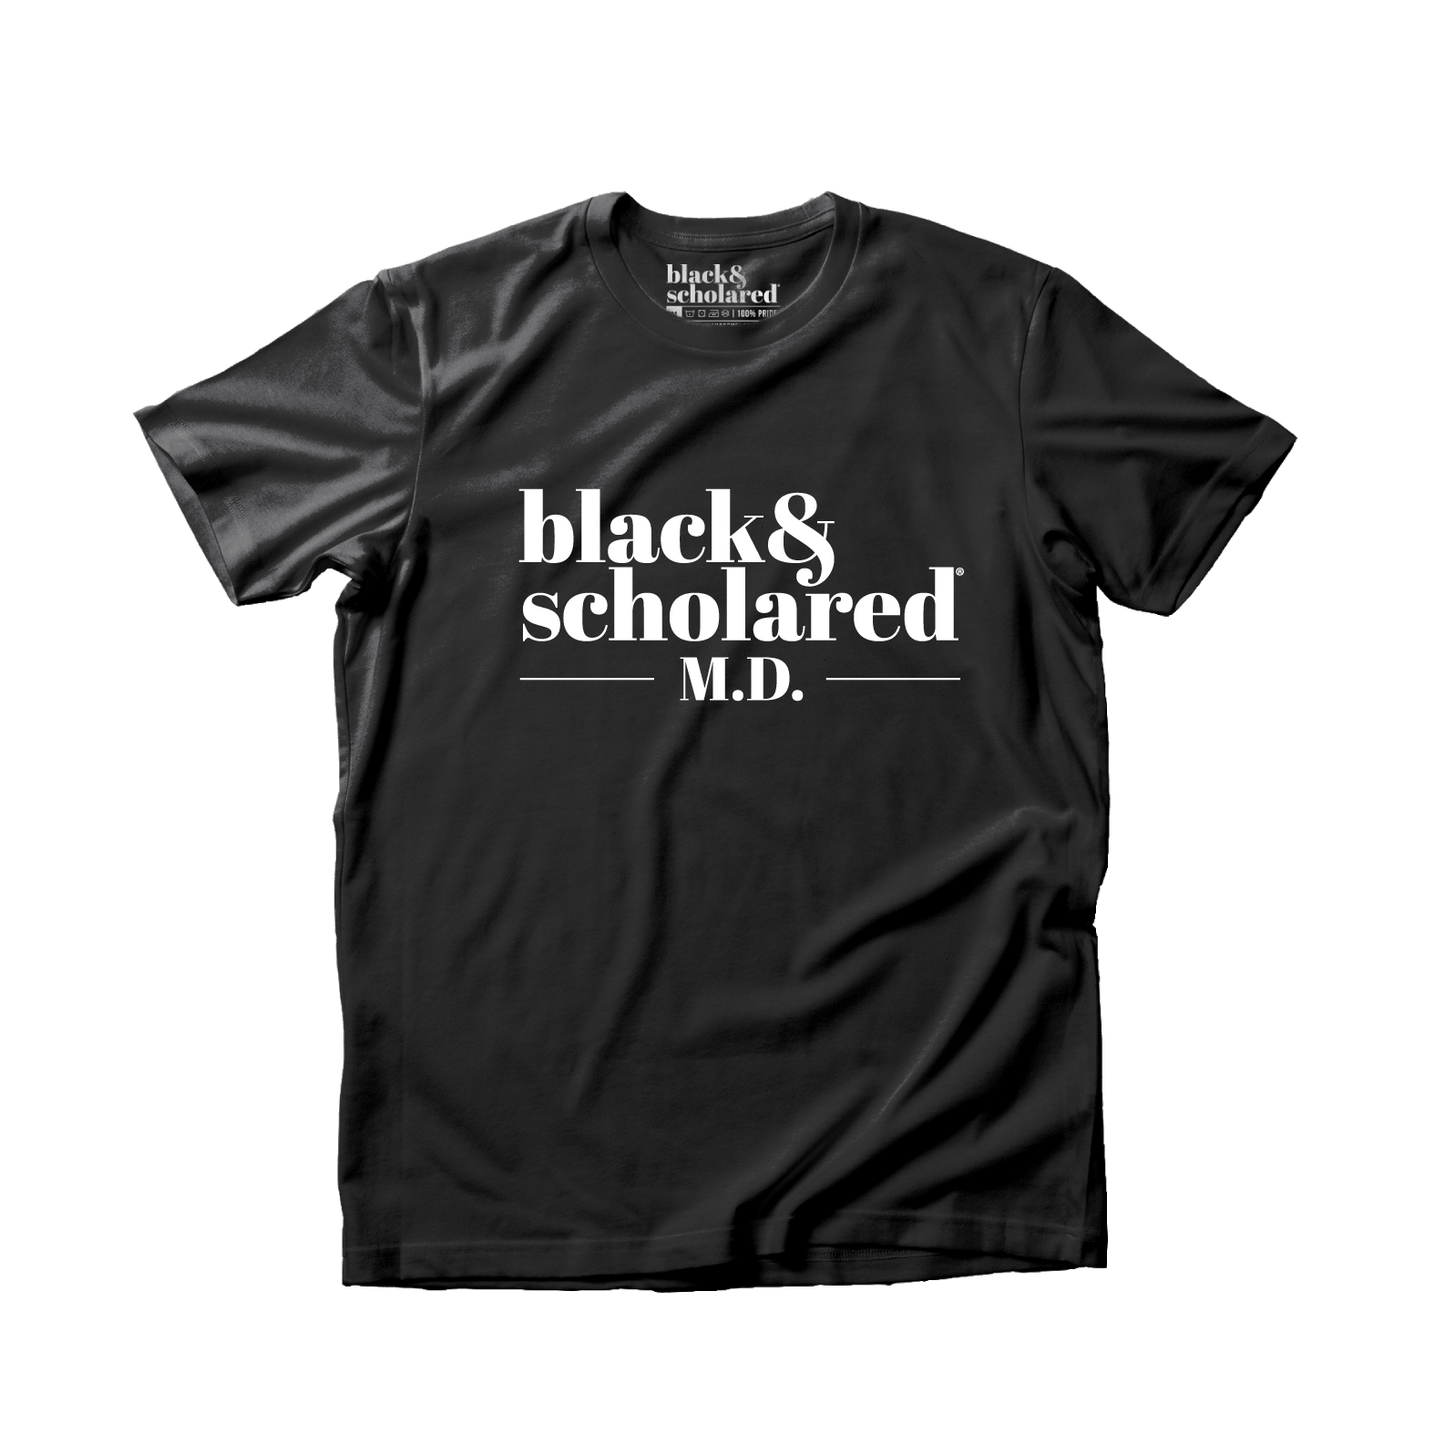 Black & Scholared® Doctorate Degree T-Shirt (PhD, MD, JD)